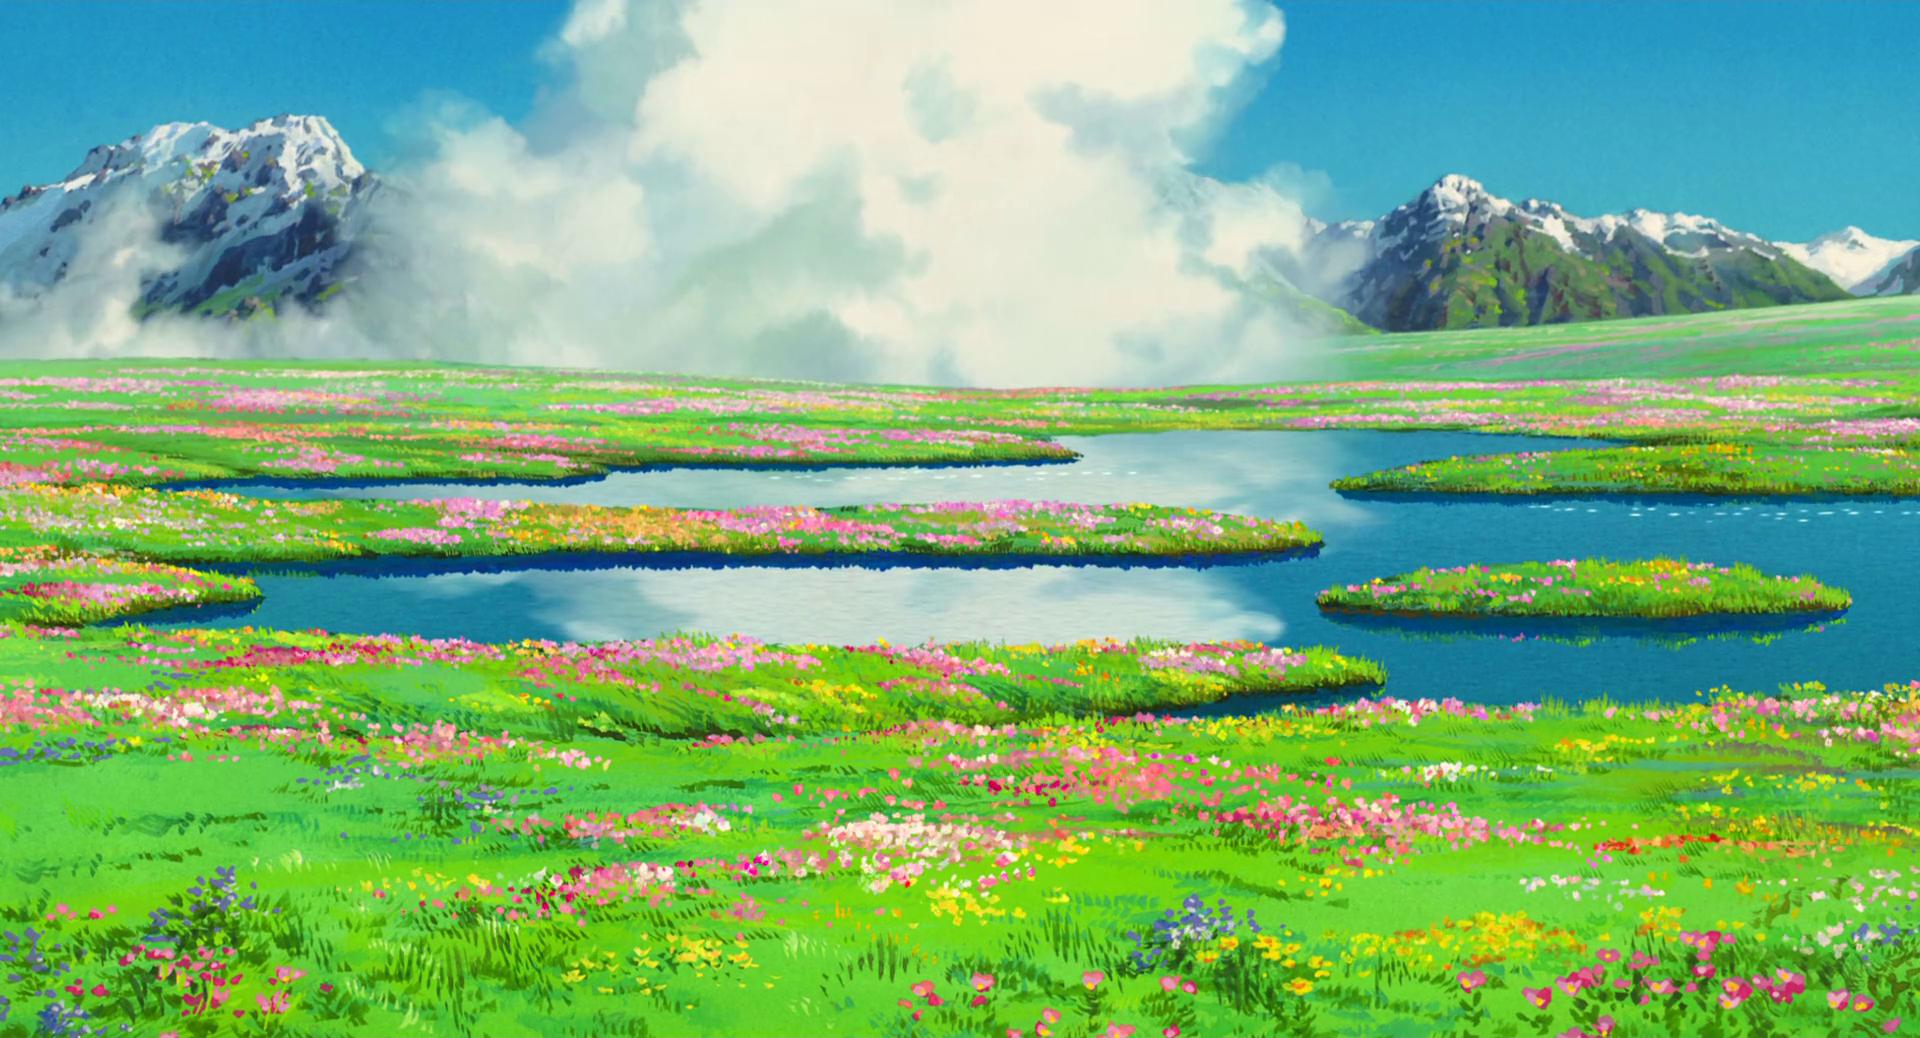 Wallpaper Wednesday 3 Another 10 Ghibli wallpapers